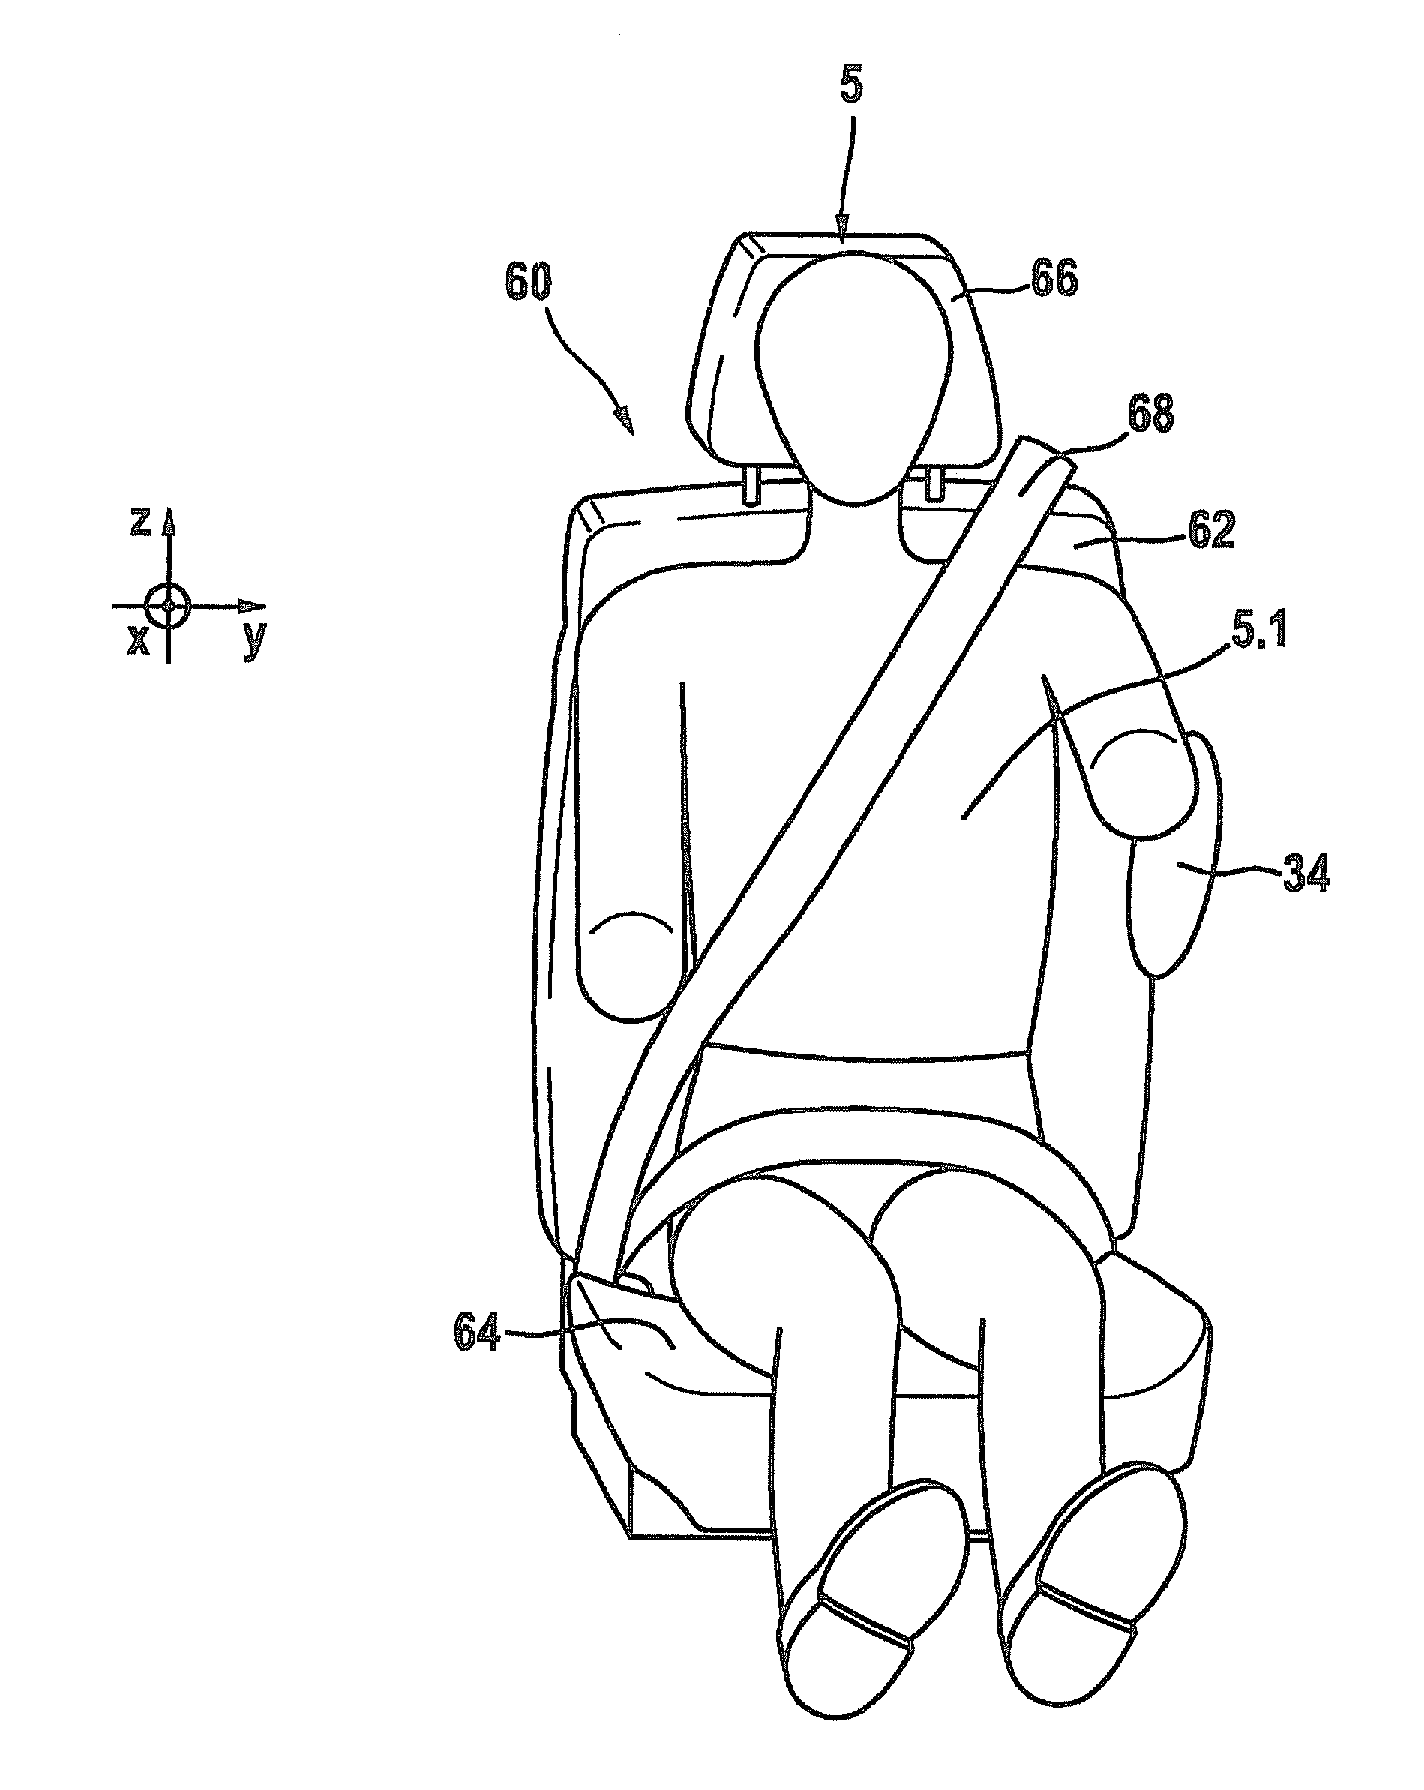 Method and device for protecting and restraining a passenger and an evaluation and control unit for a protection and restraint device